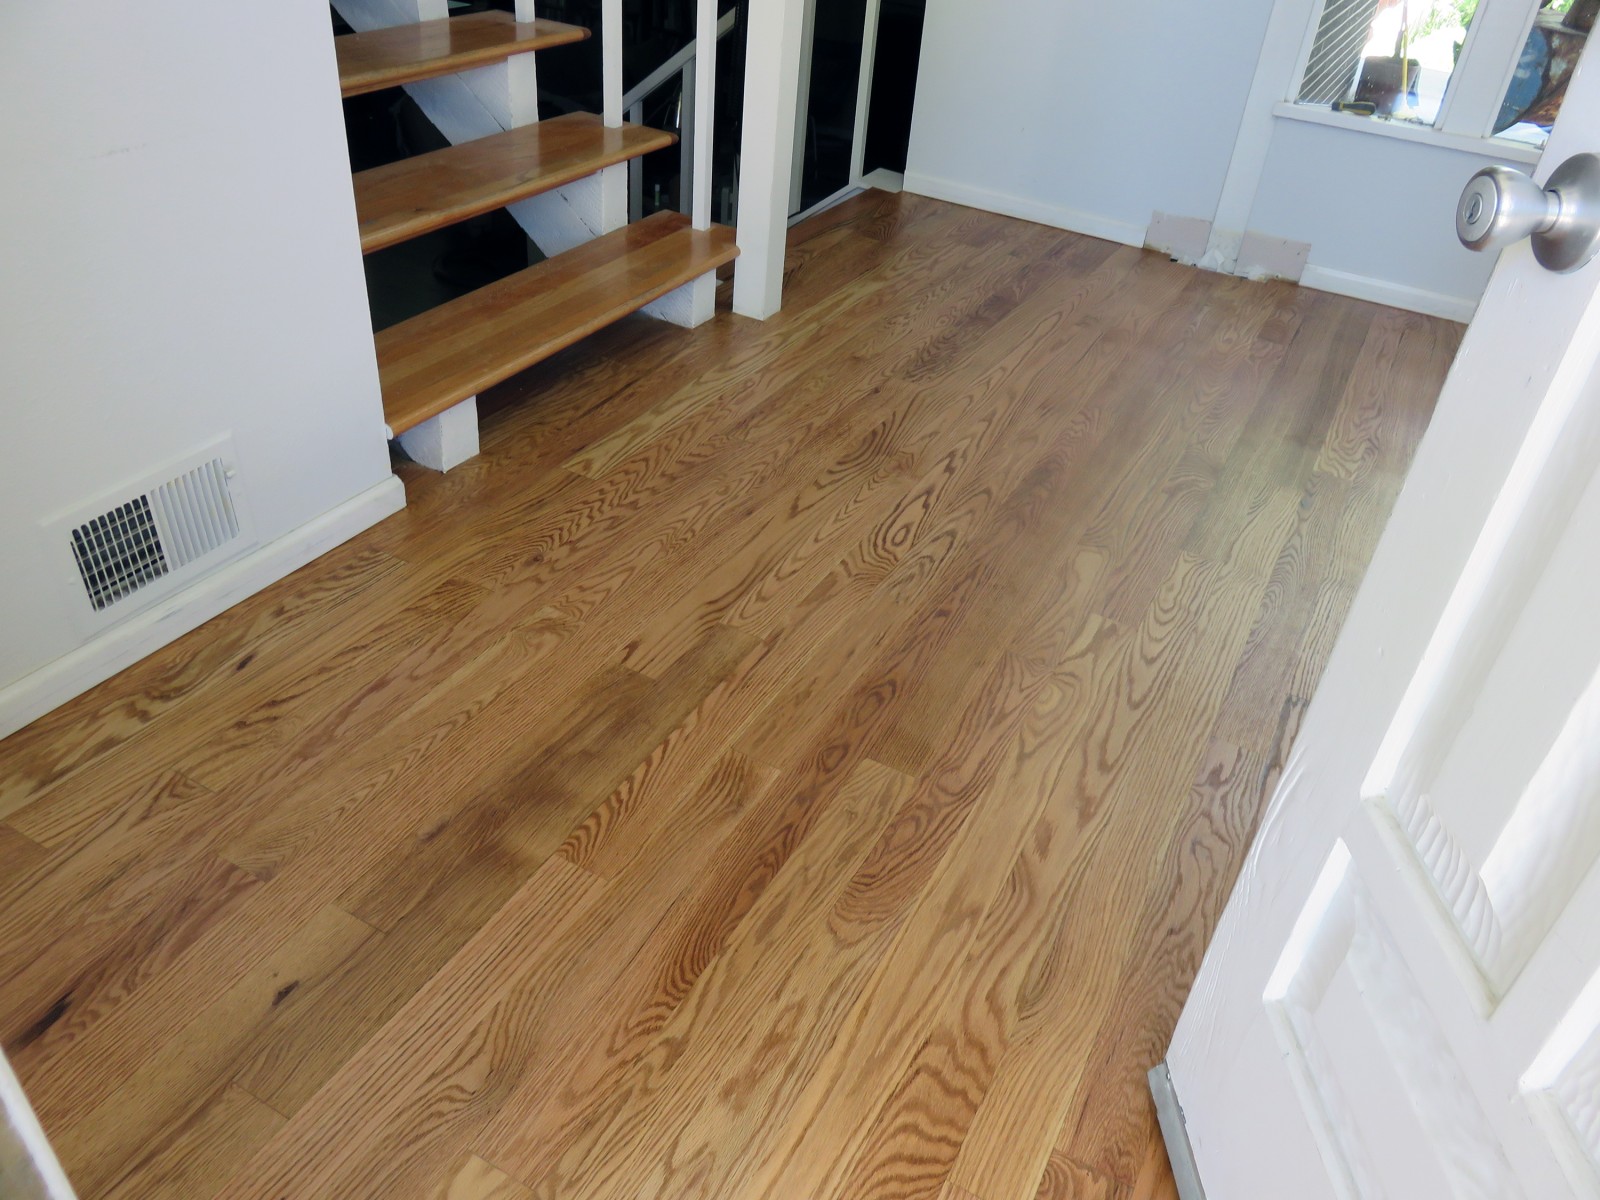 Minwax Golden Oak Wood Stain On Red, How To Apply Minwax Stain To Hardwood Floors